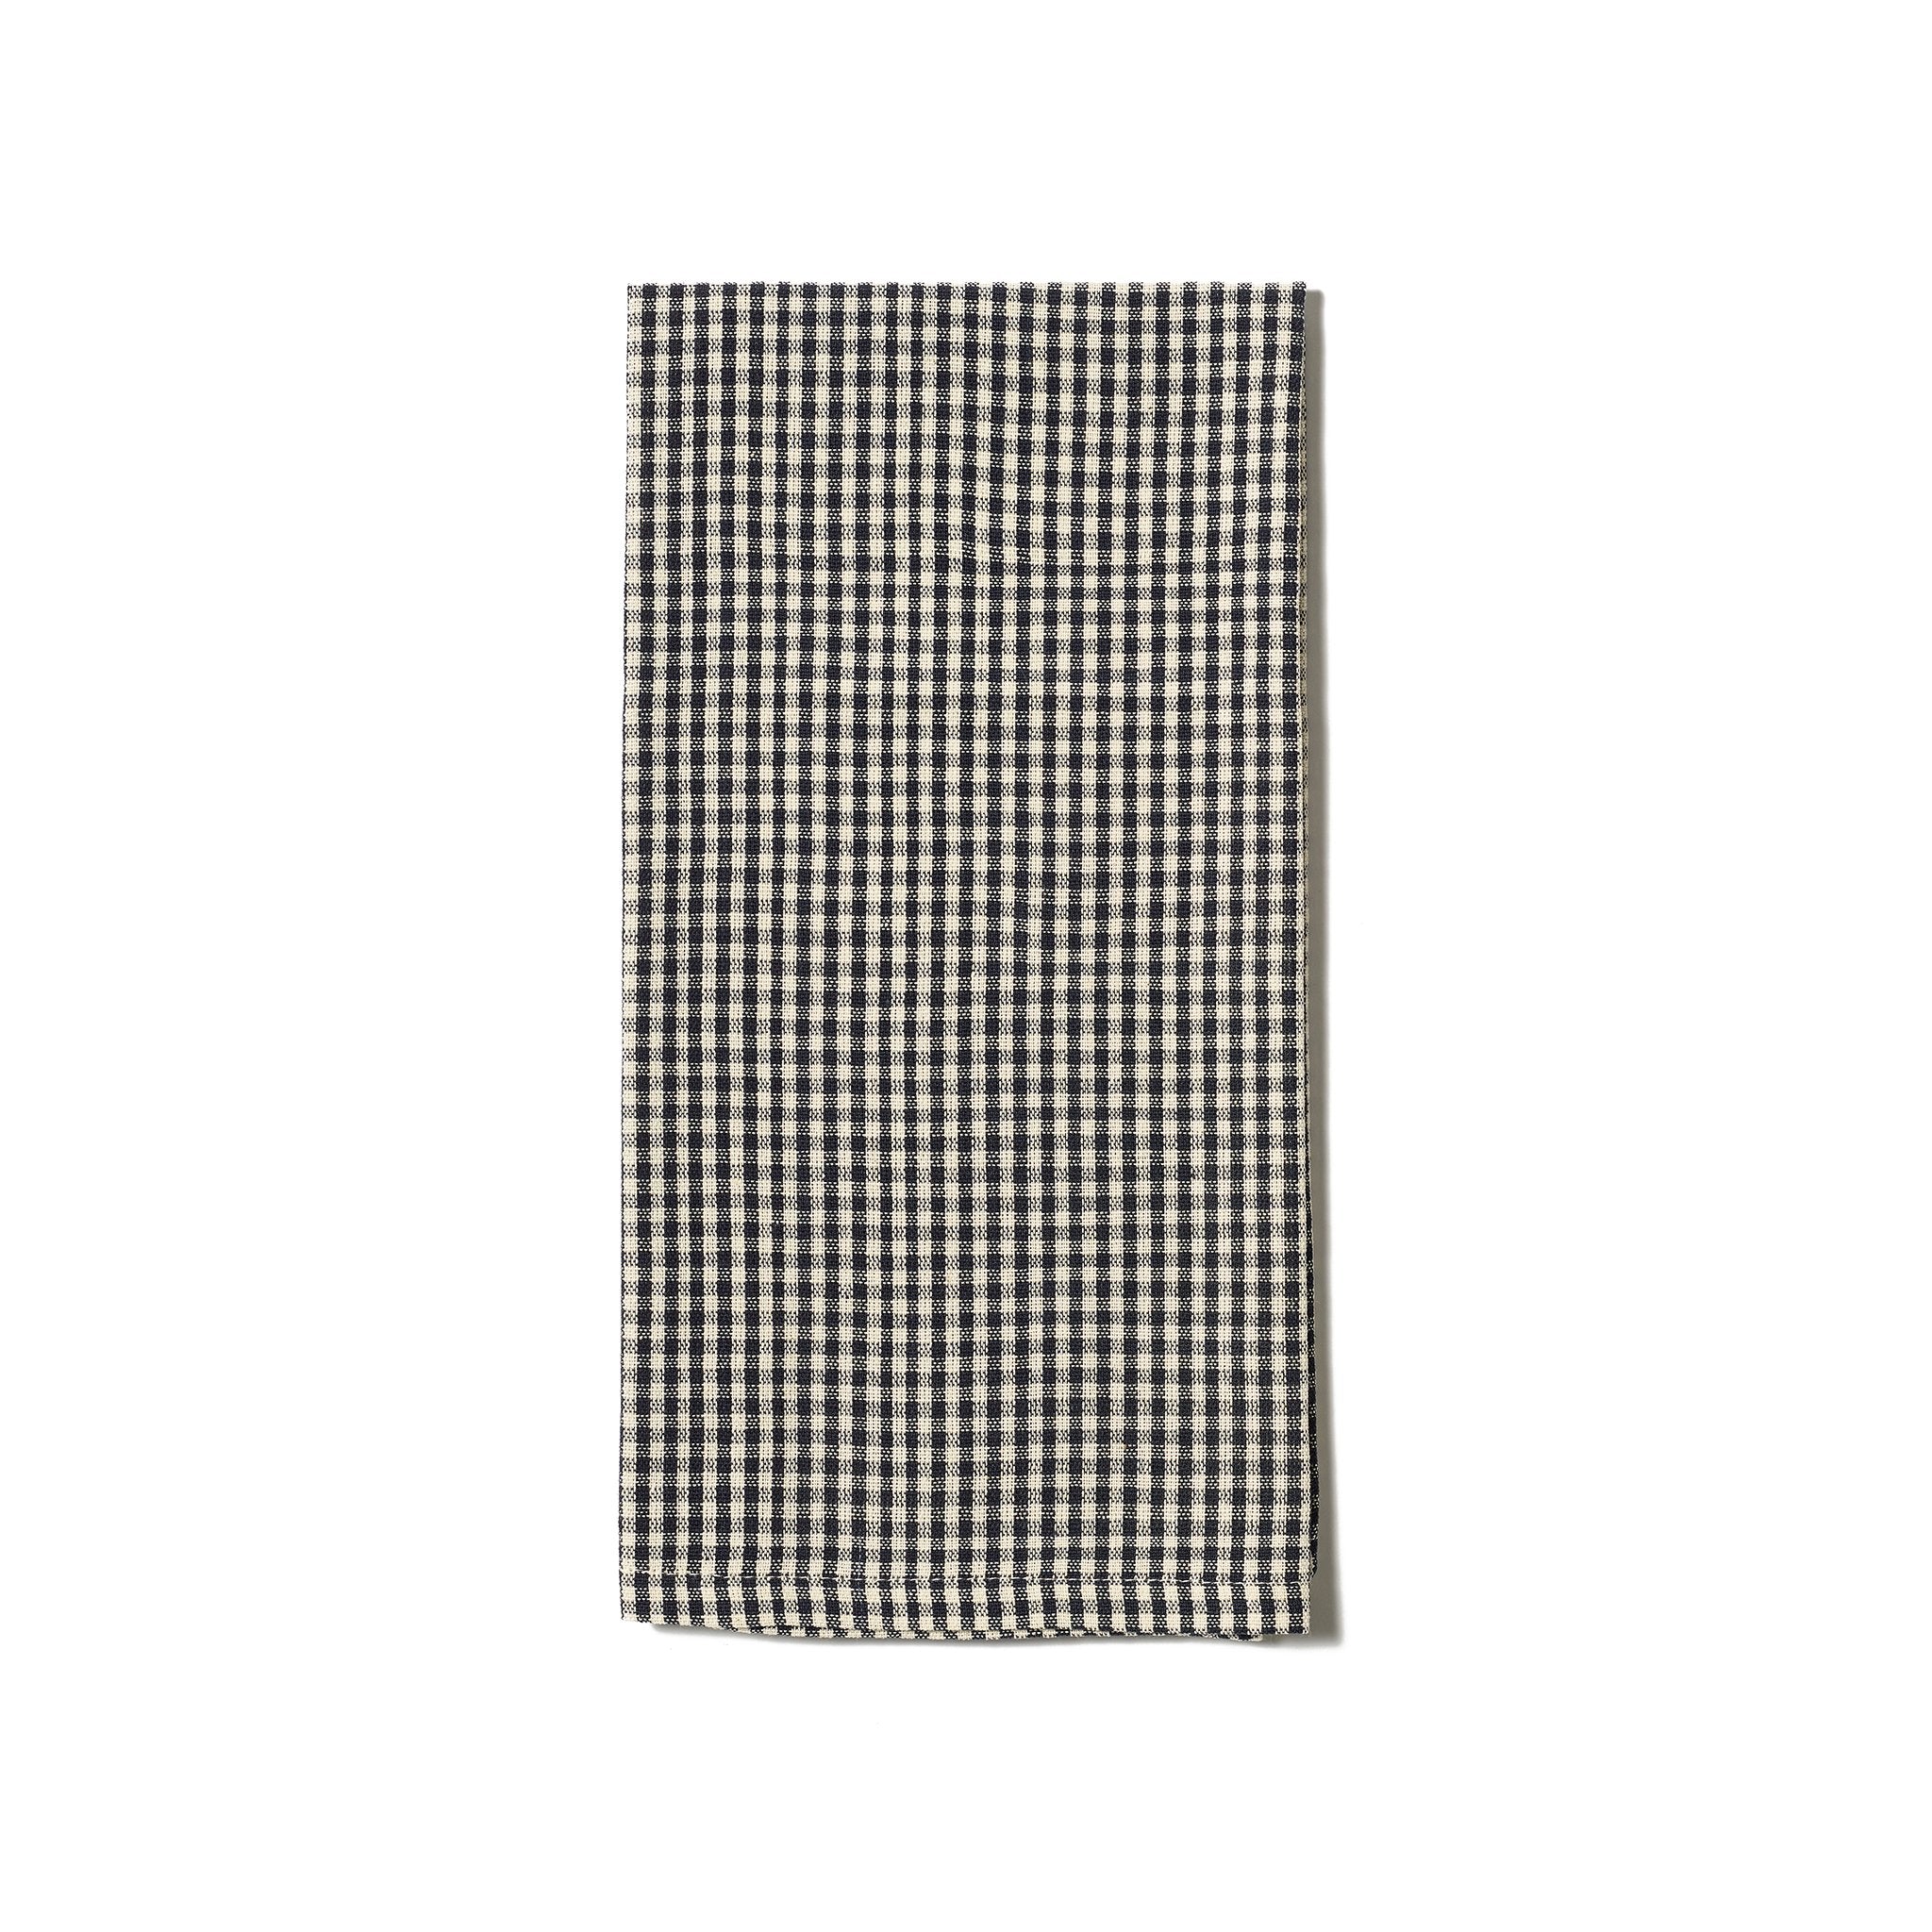 Update your kitchen with this chic yet durable and absorbent black gingham kitchen towel, hand-woven from 100% Ethiopian cotton and dyed in small batches.